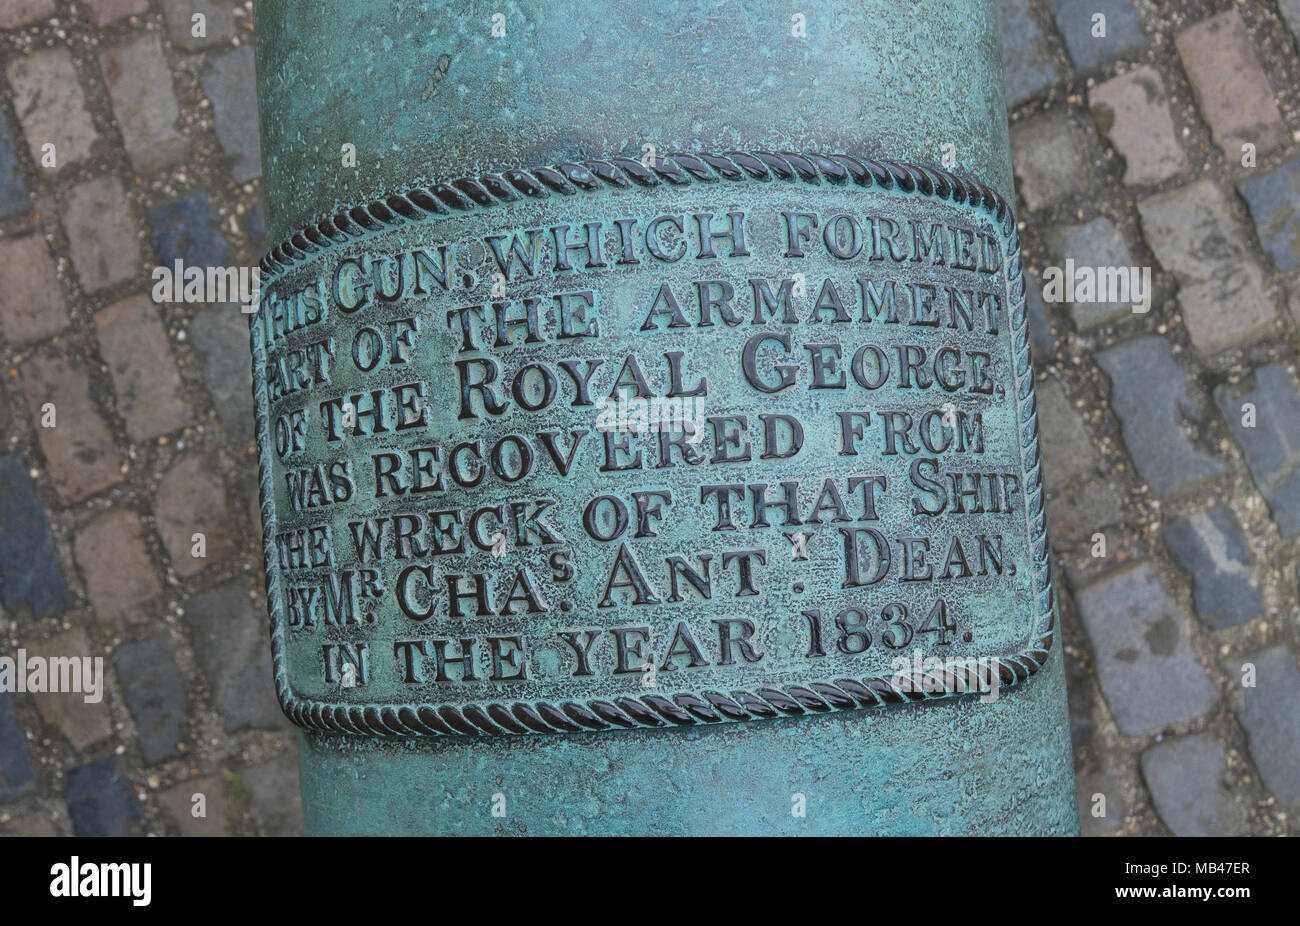 England, Hampshire, Portsmouth, Southsea castle, gun recovered from the wreck of ship Royal George in 1834 Stock Photo